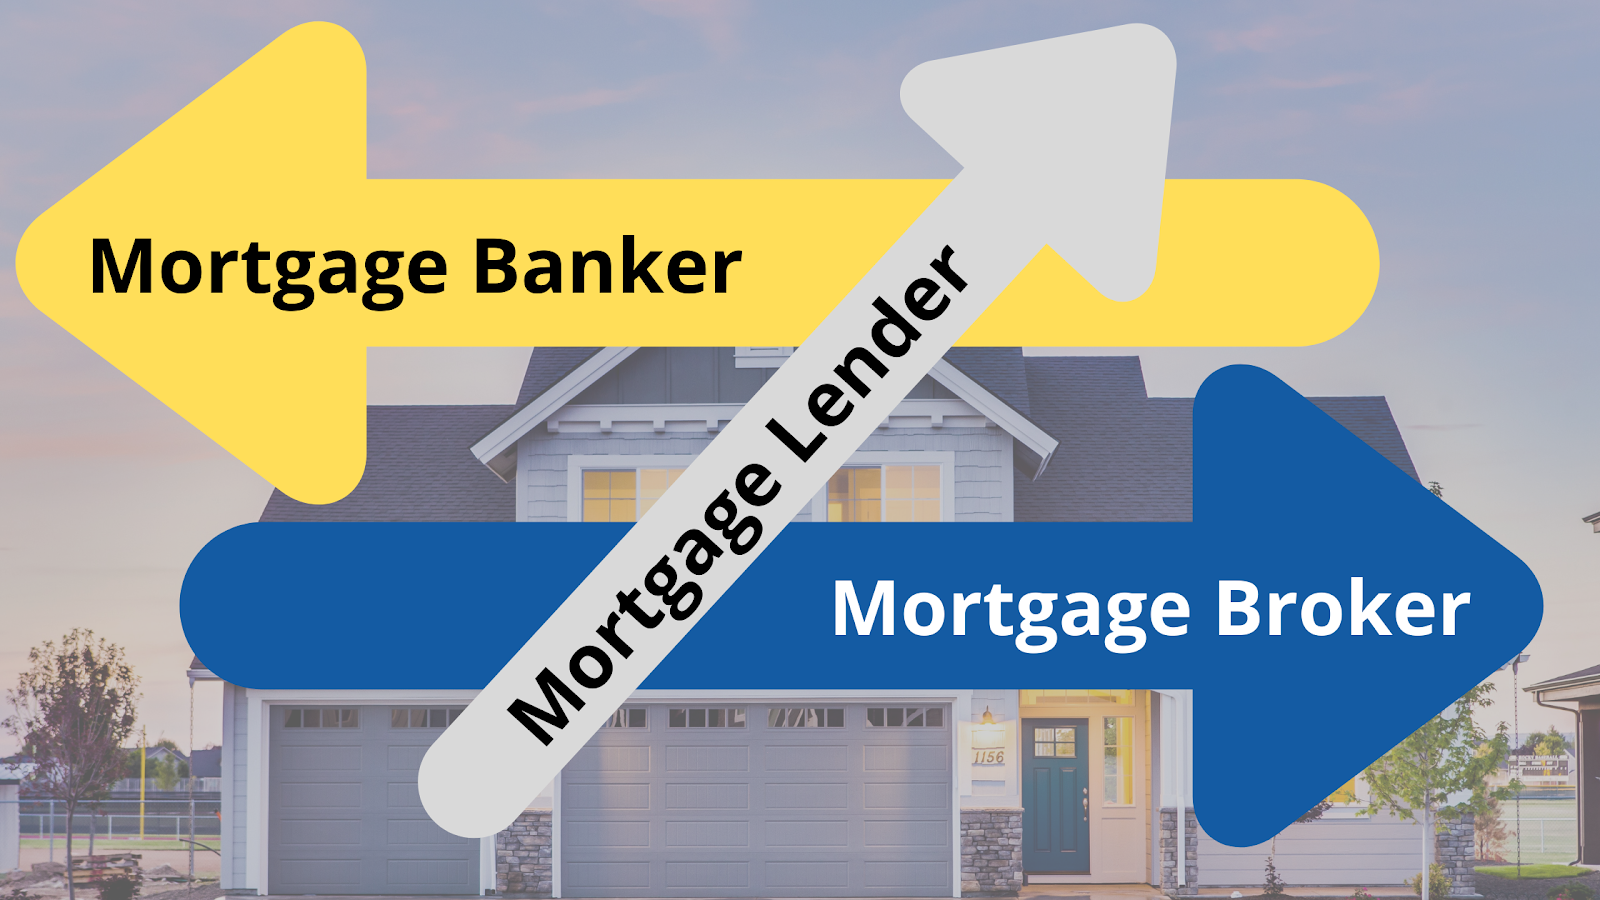 Understanding the Different Mortgage Lending Options: Brokers, Bankers, and More